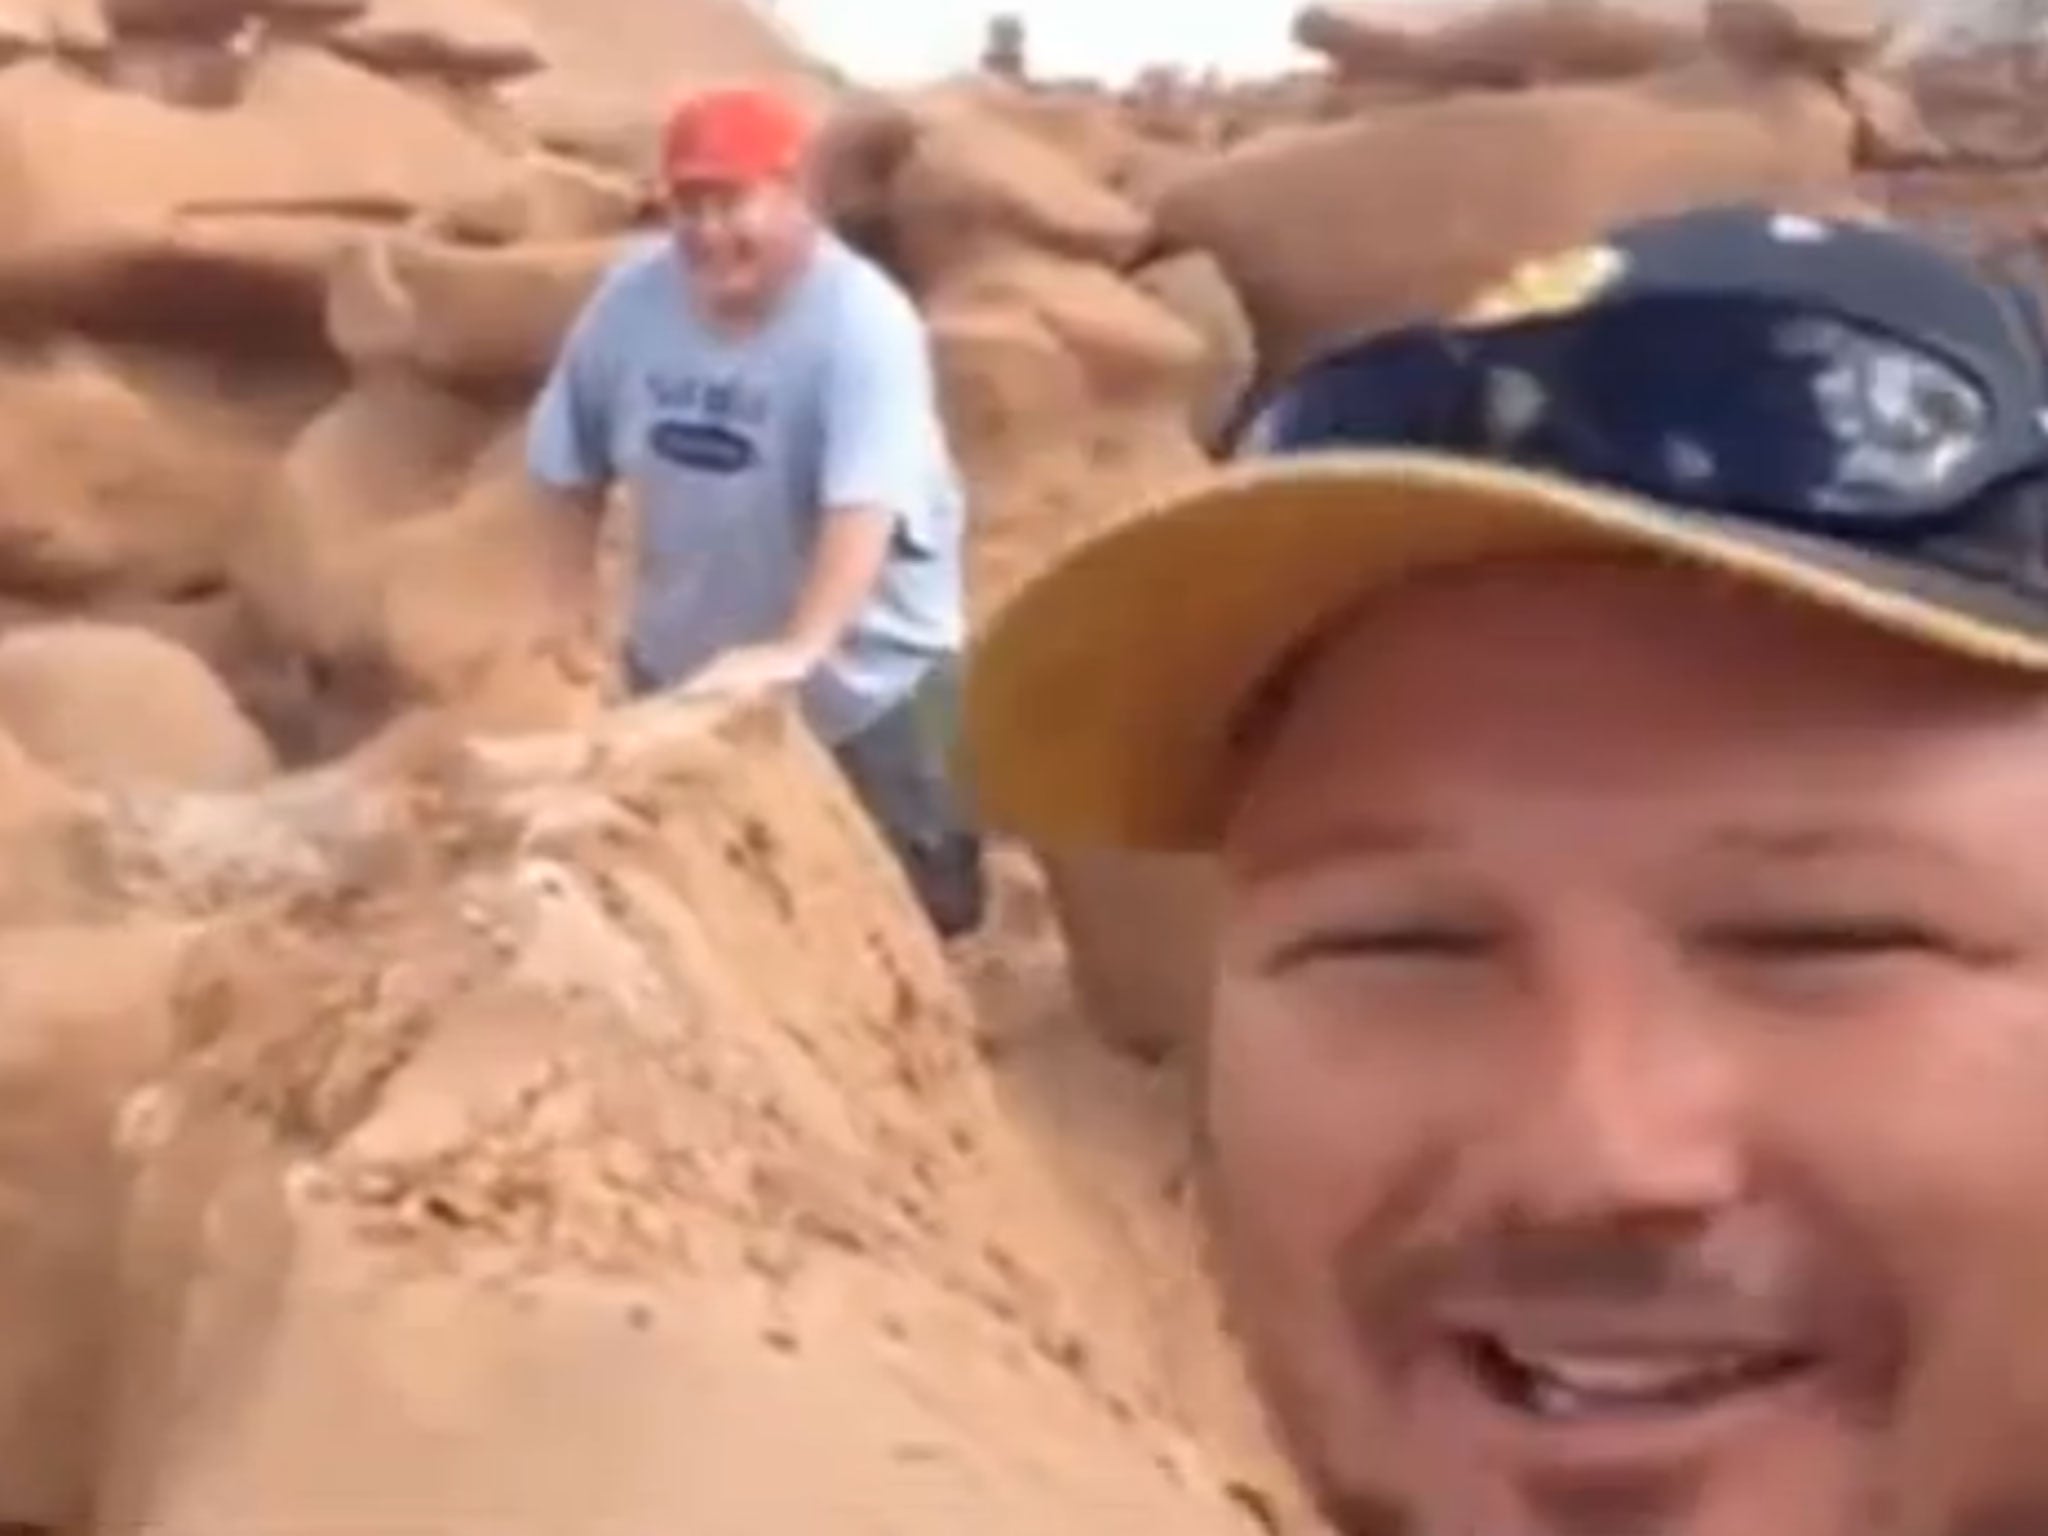 A group of hikers who high-fived each other and celebrated after toppling a 200-million-year-old rock formation in a Utah park are facing possible felony charges after a video of them pushing the formation over was posted on YouTube.